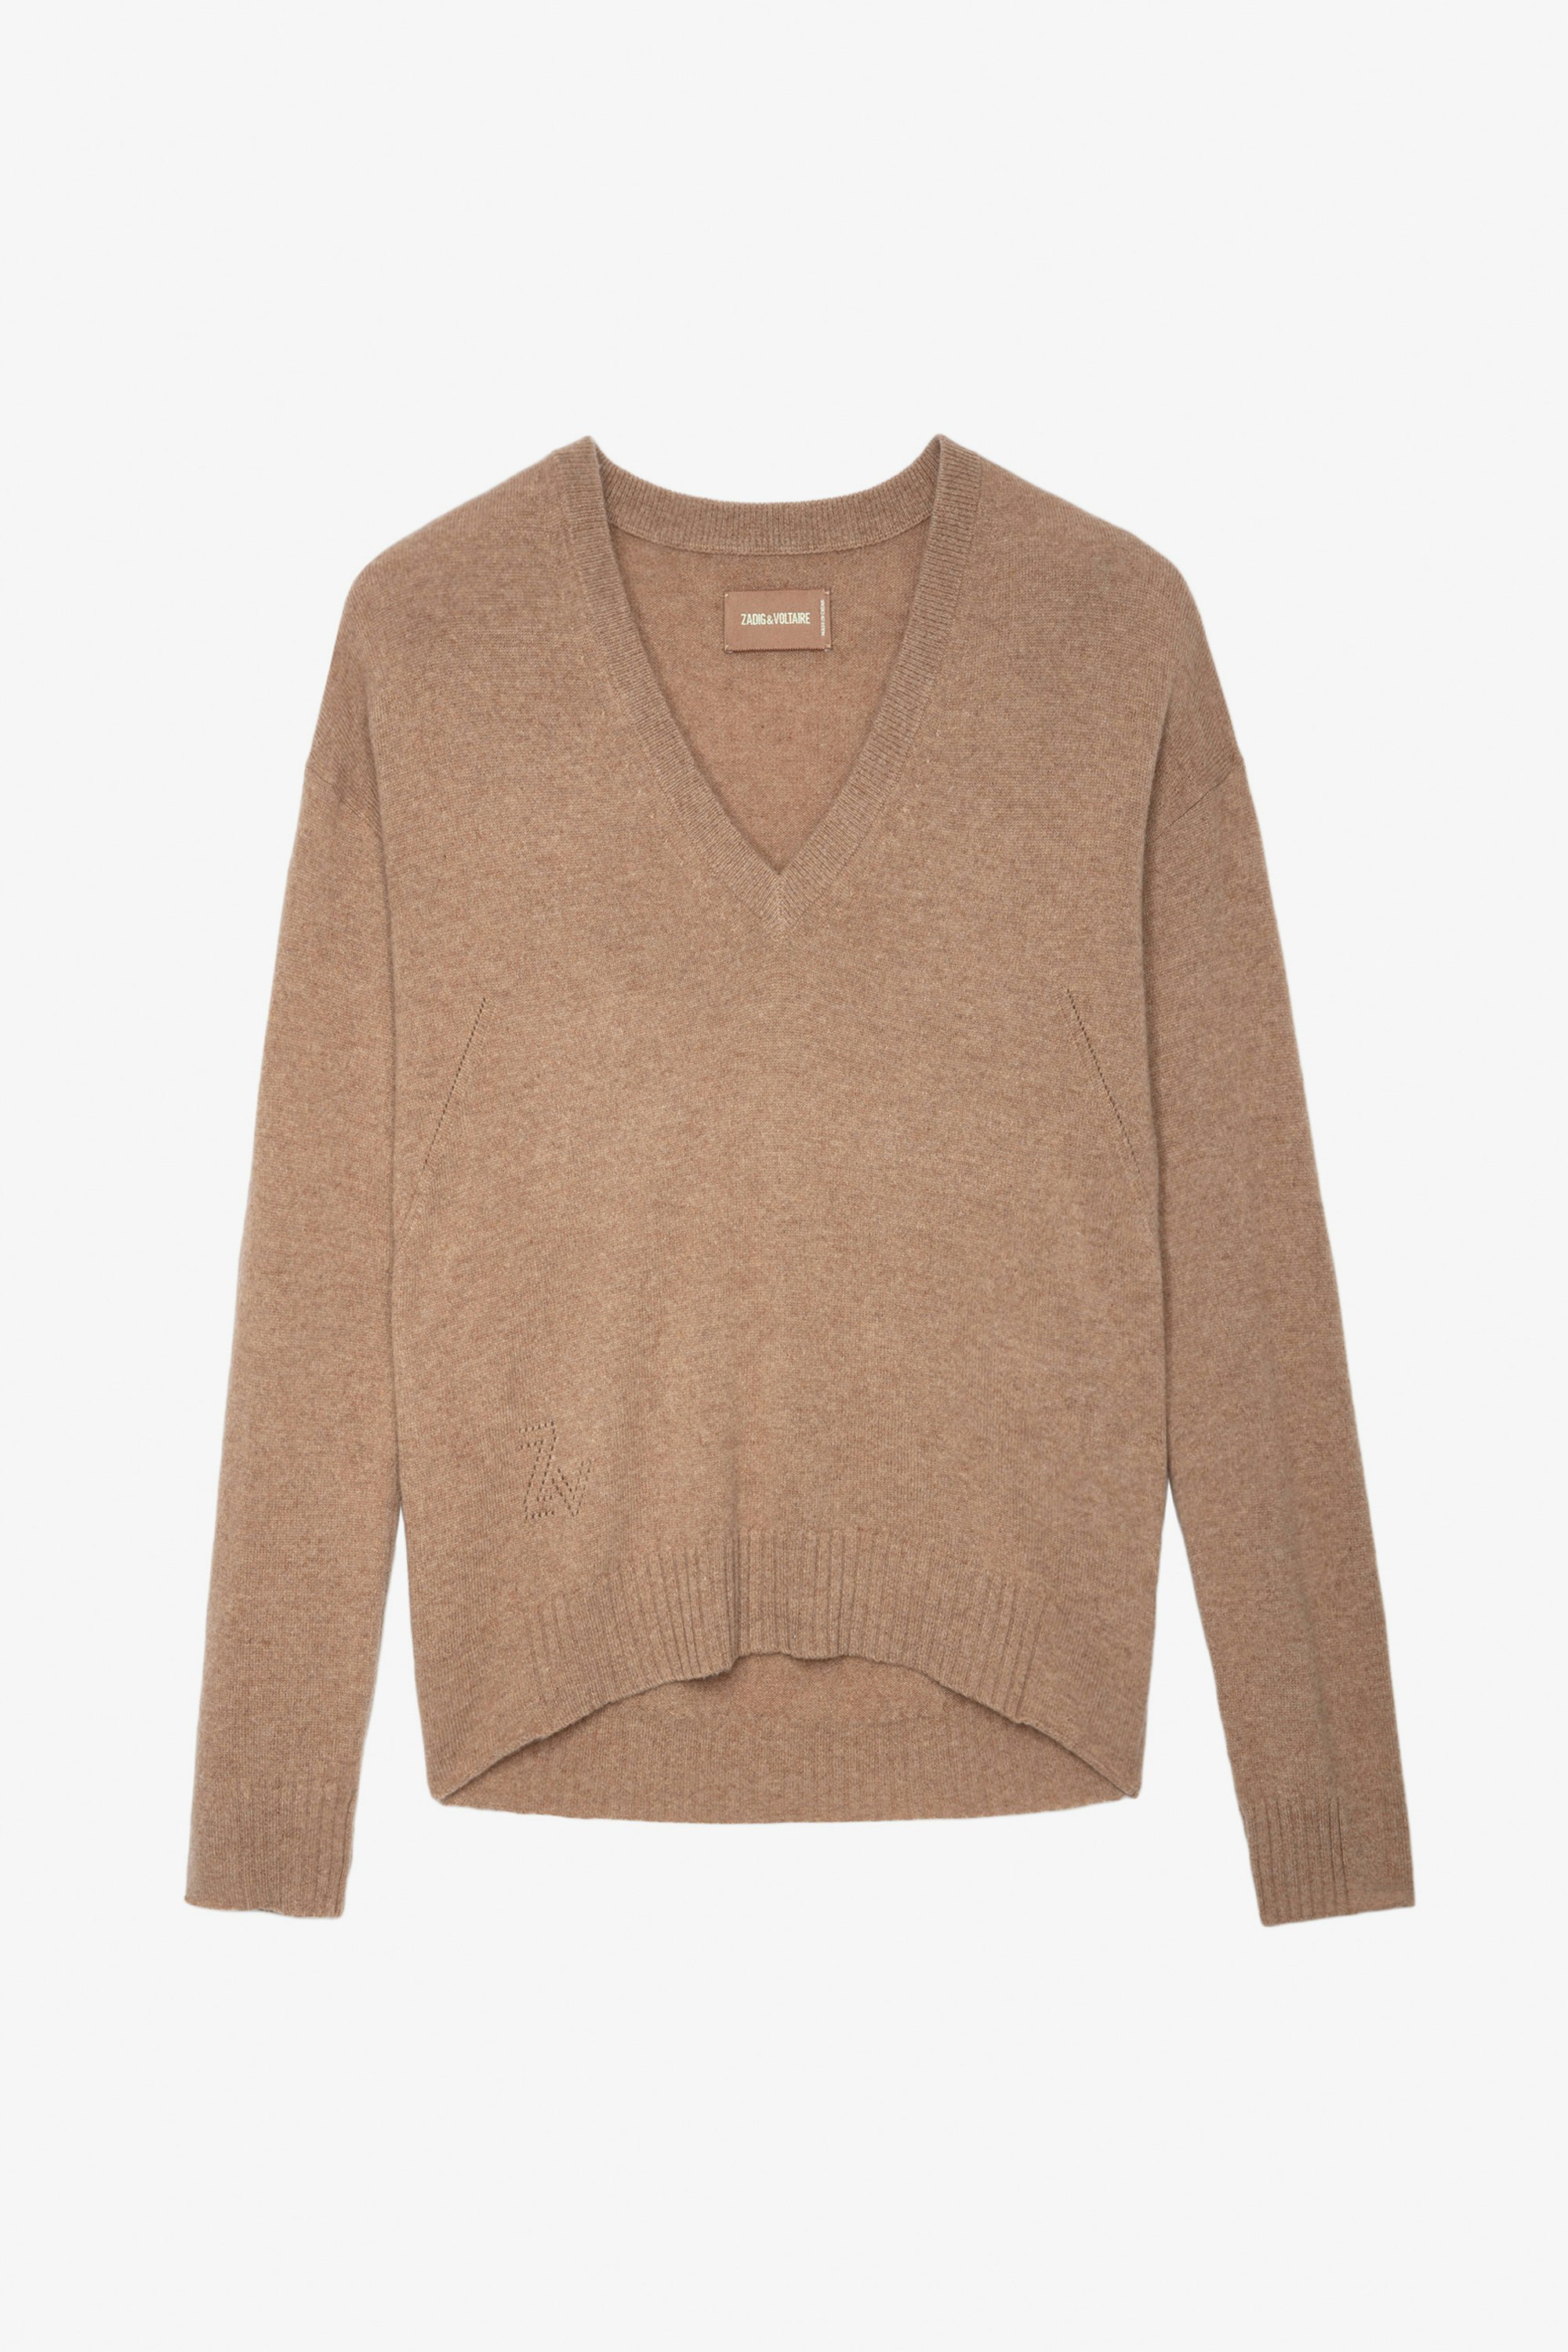 Vivi Patch Cashmere Jumper - Women’s camel cashmere jumper with star patches on the elbows.